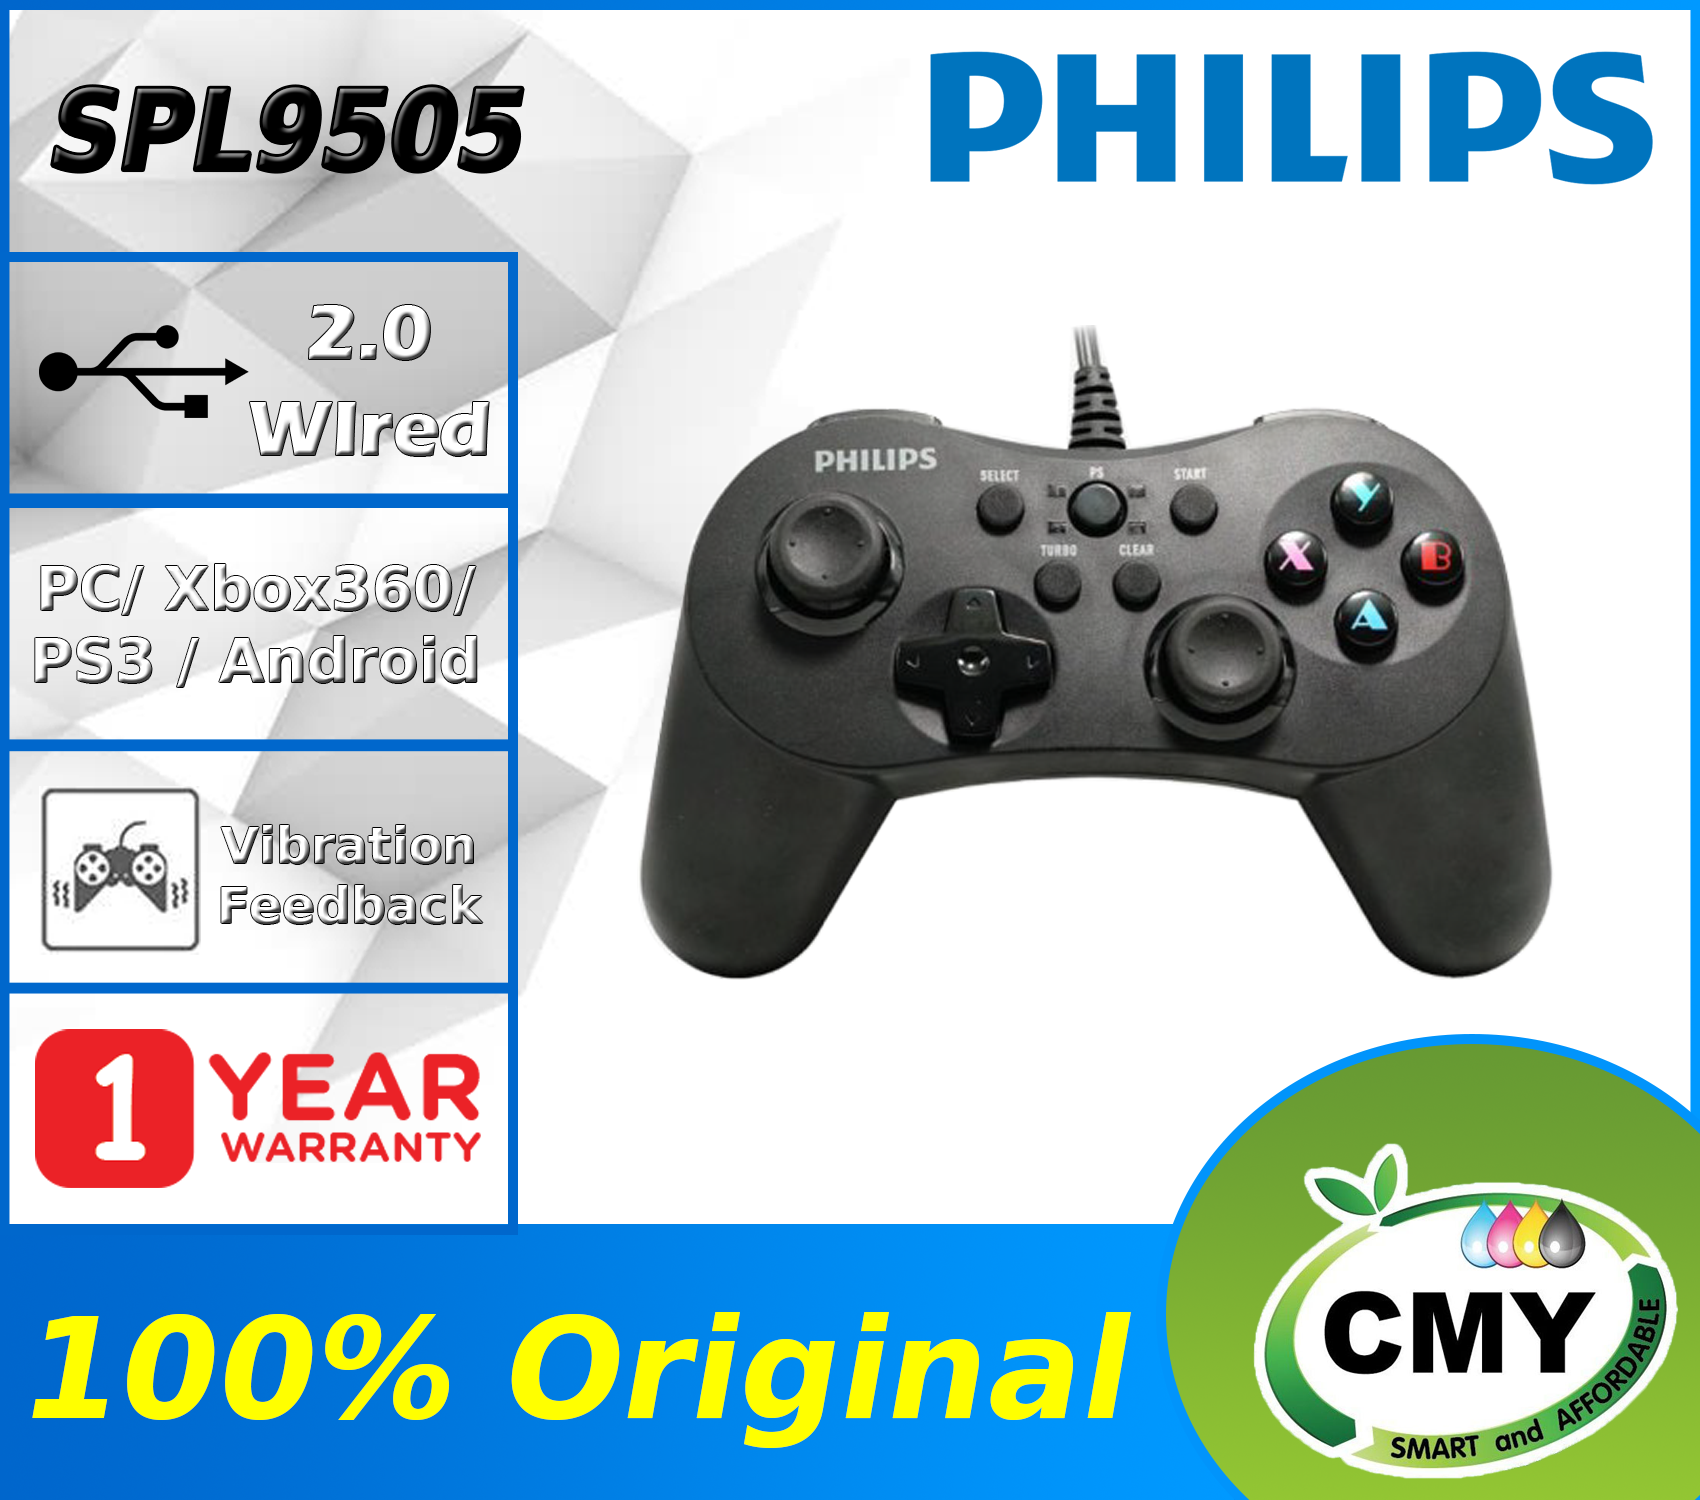 PHILIPS SPL9505 WIRED GAME CONTROLLER BLACK G505